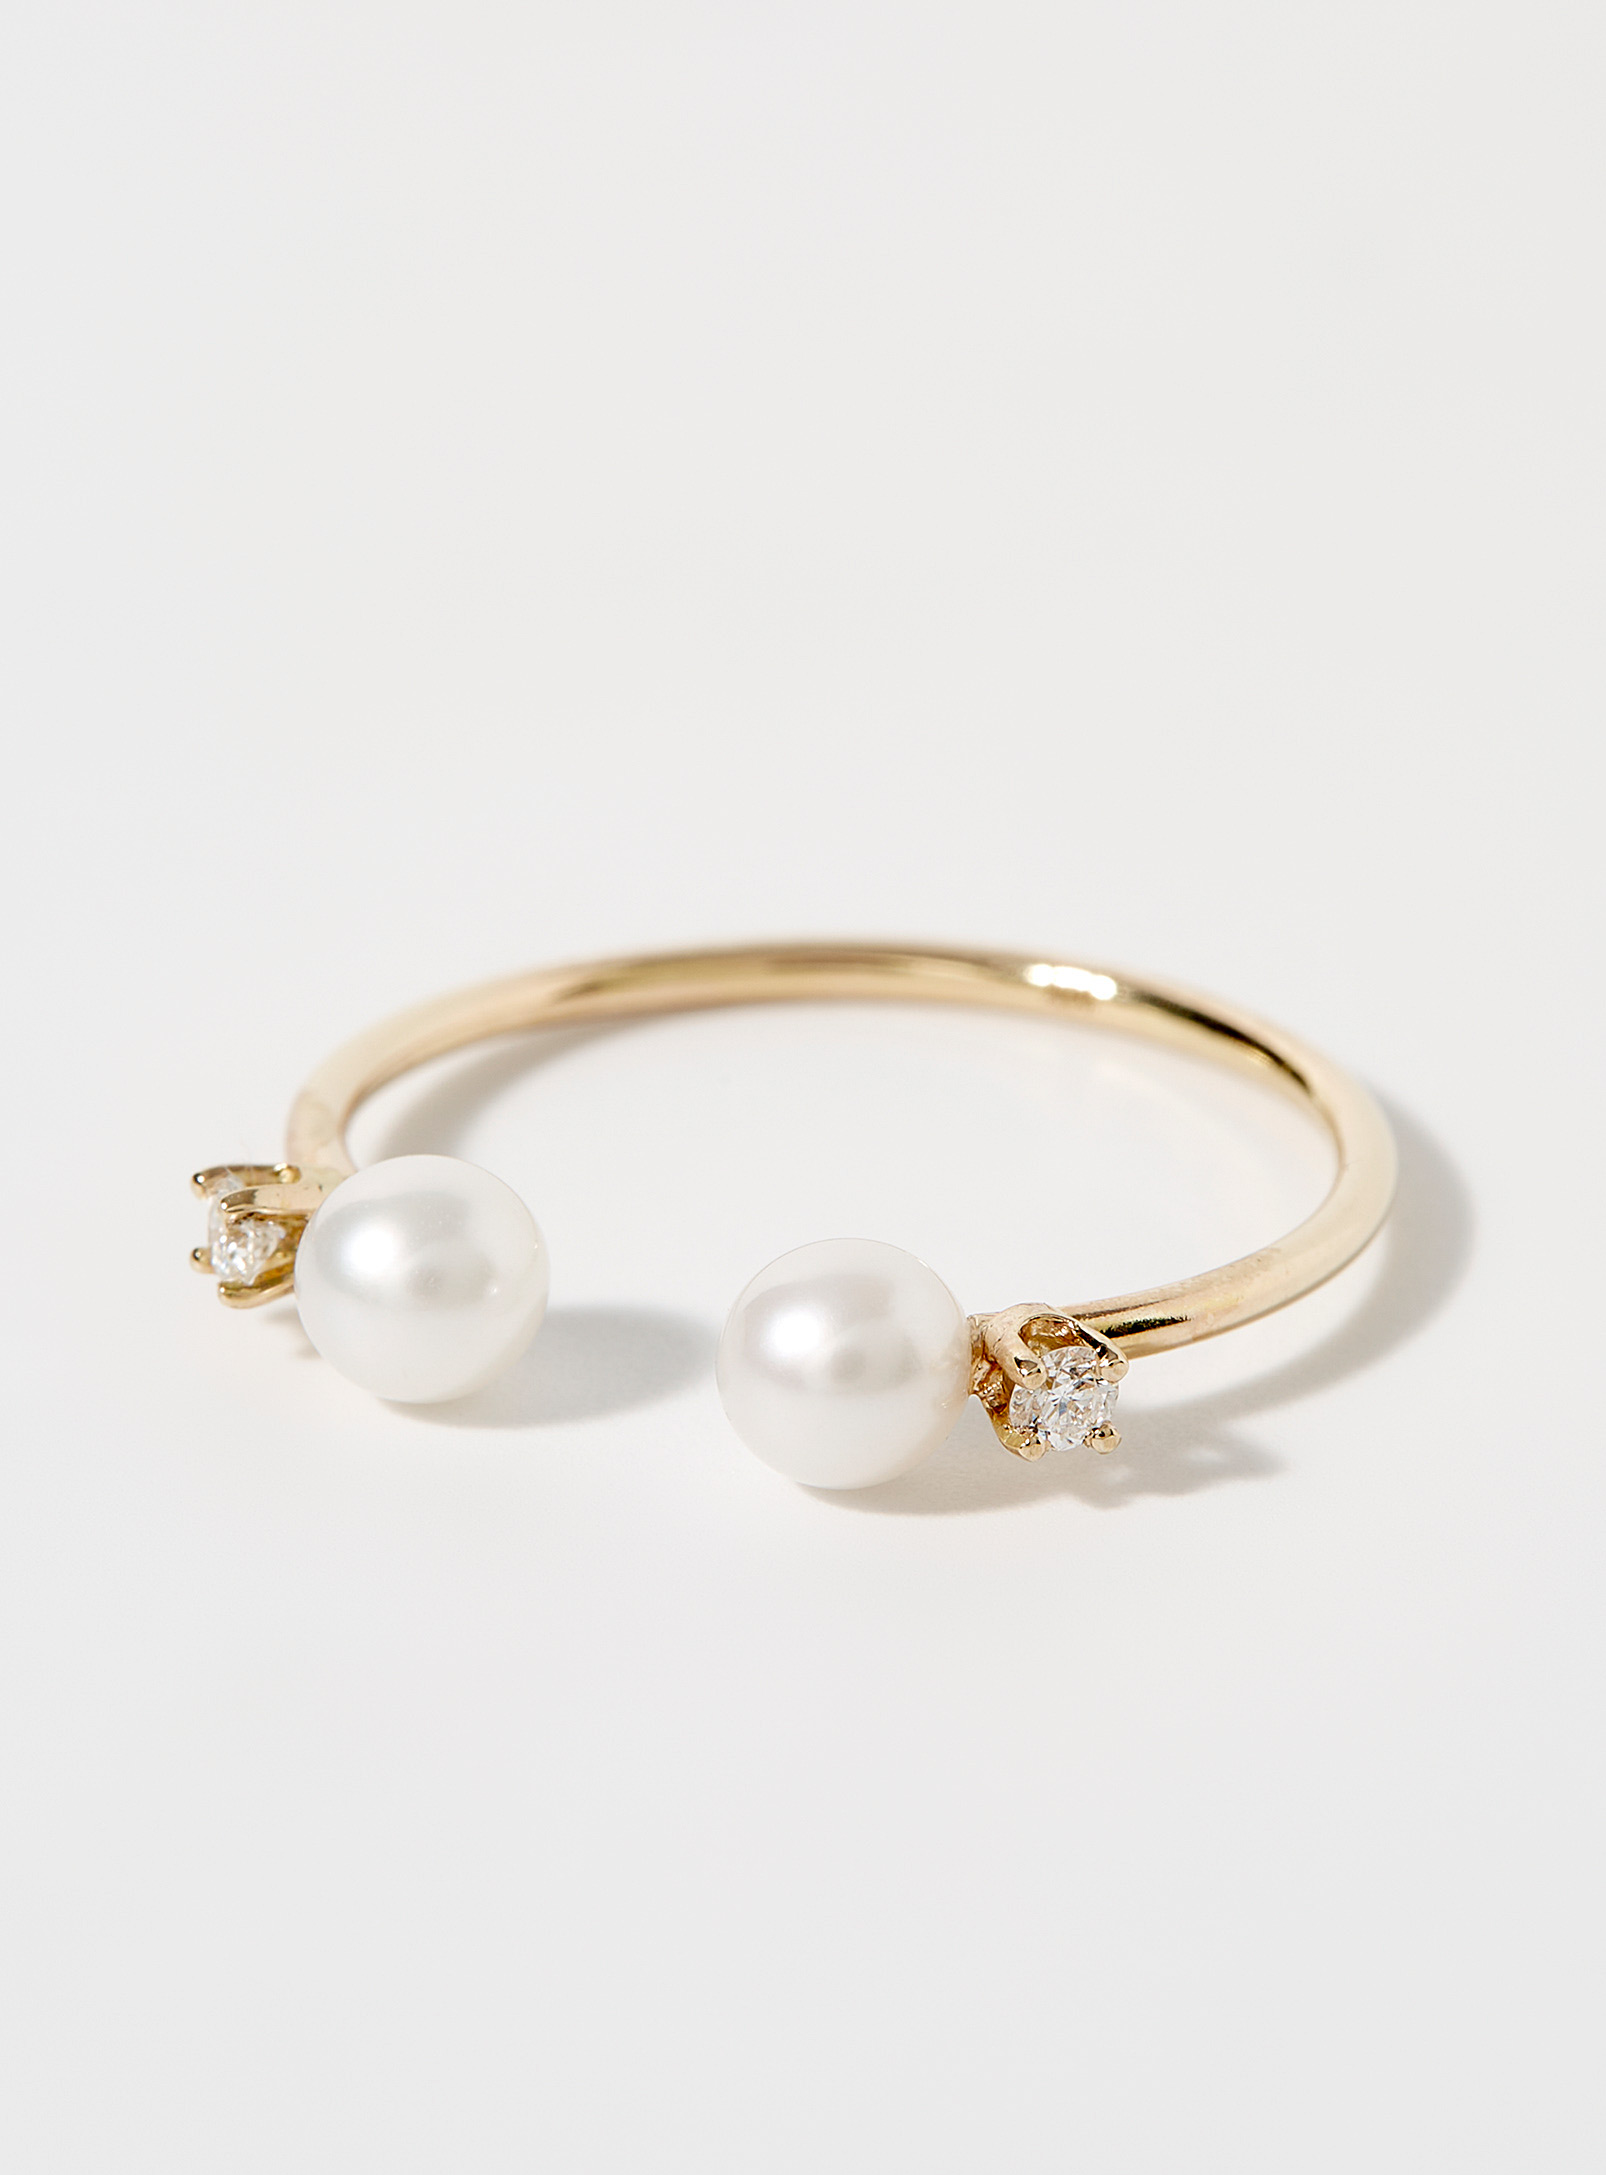 Poppy Finch - Women's Pearls and diamonds ring